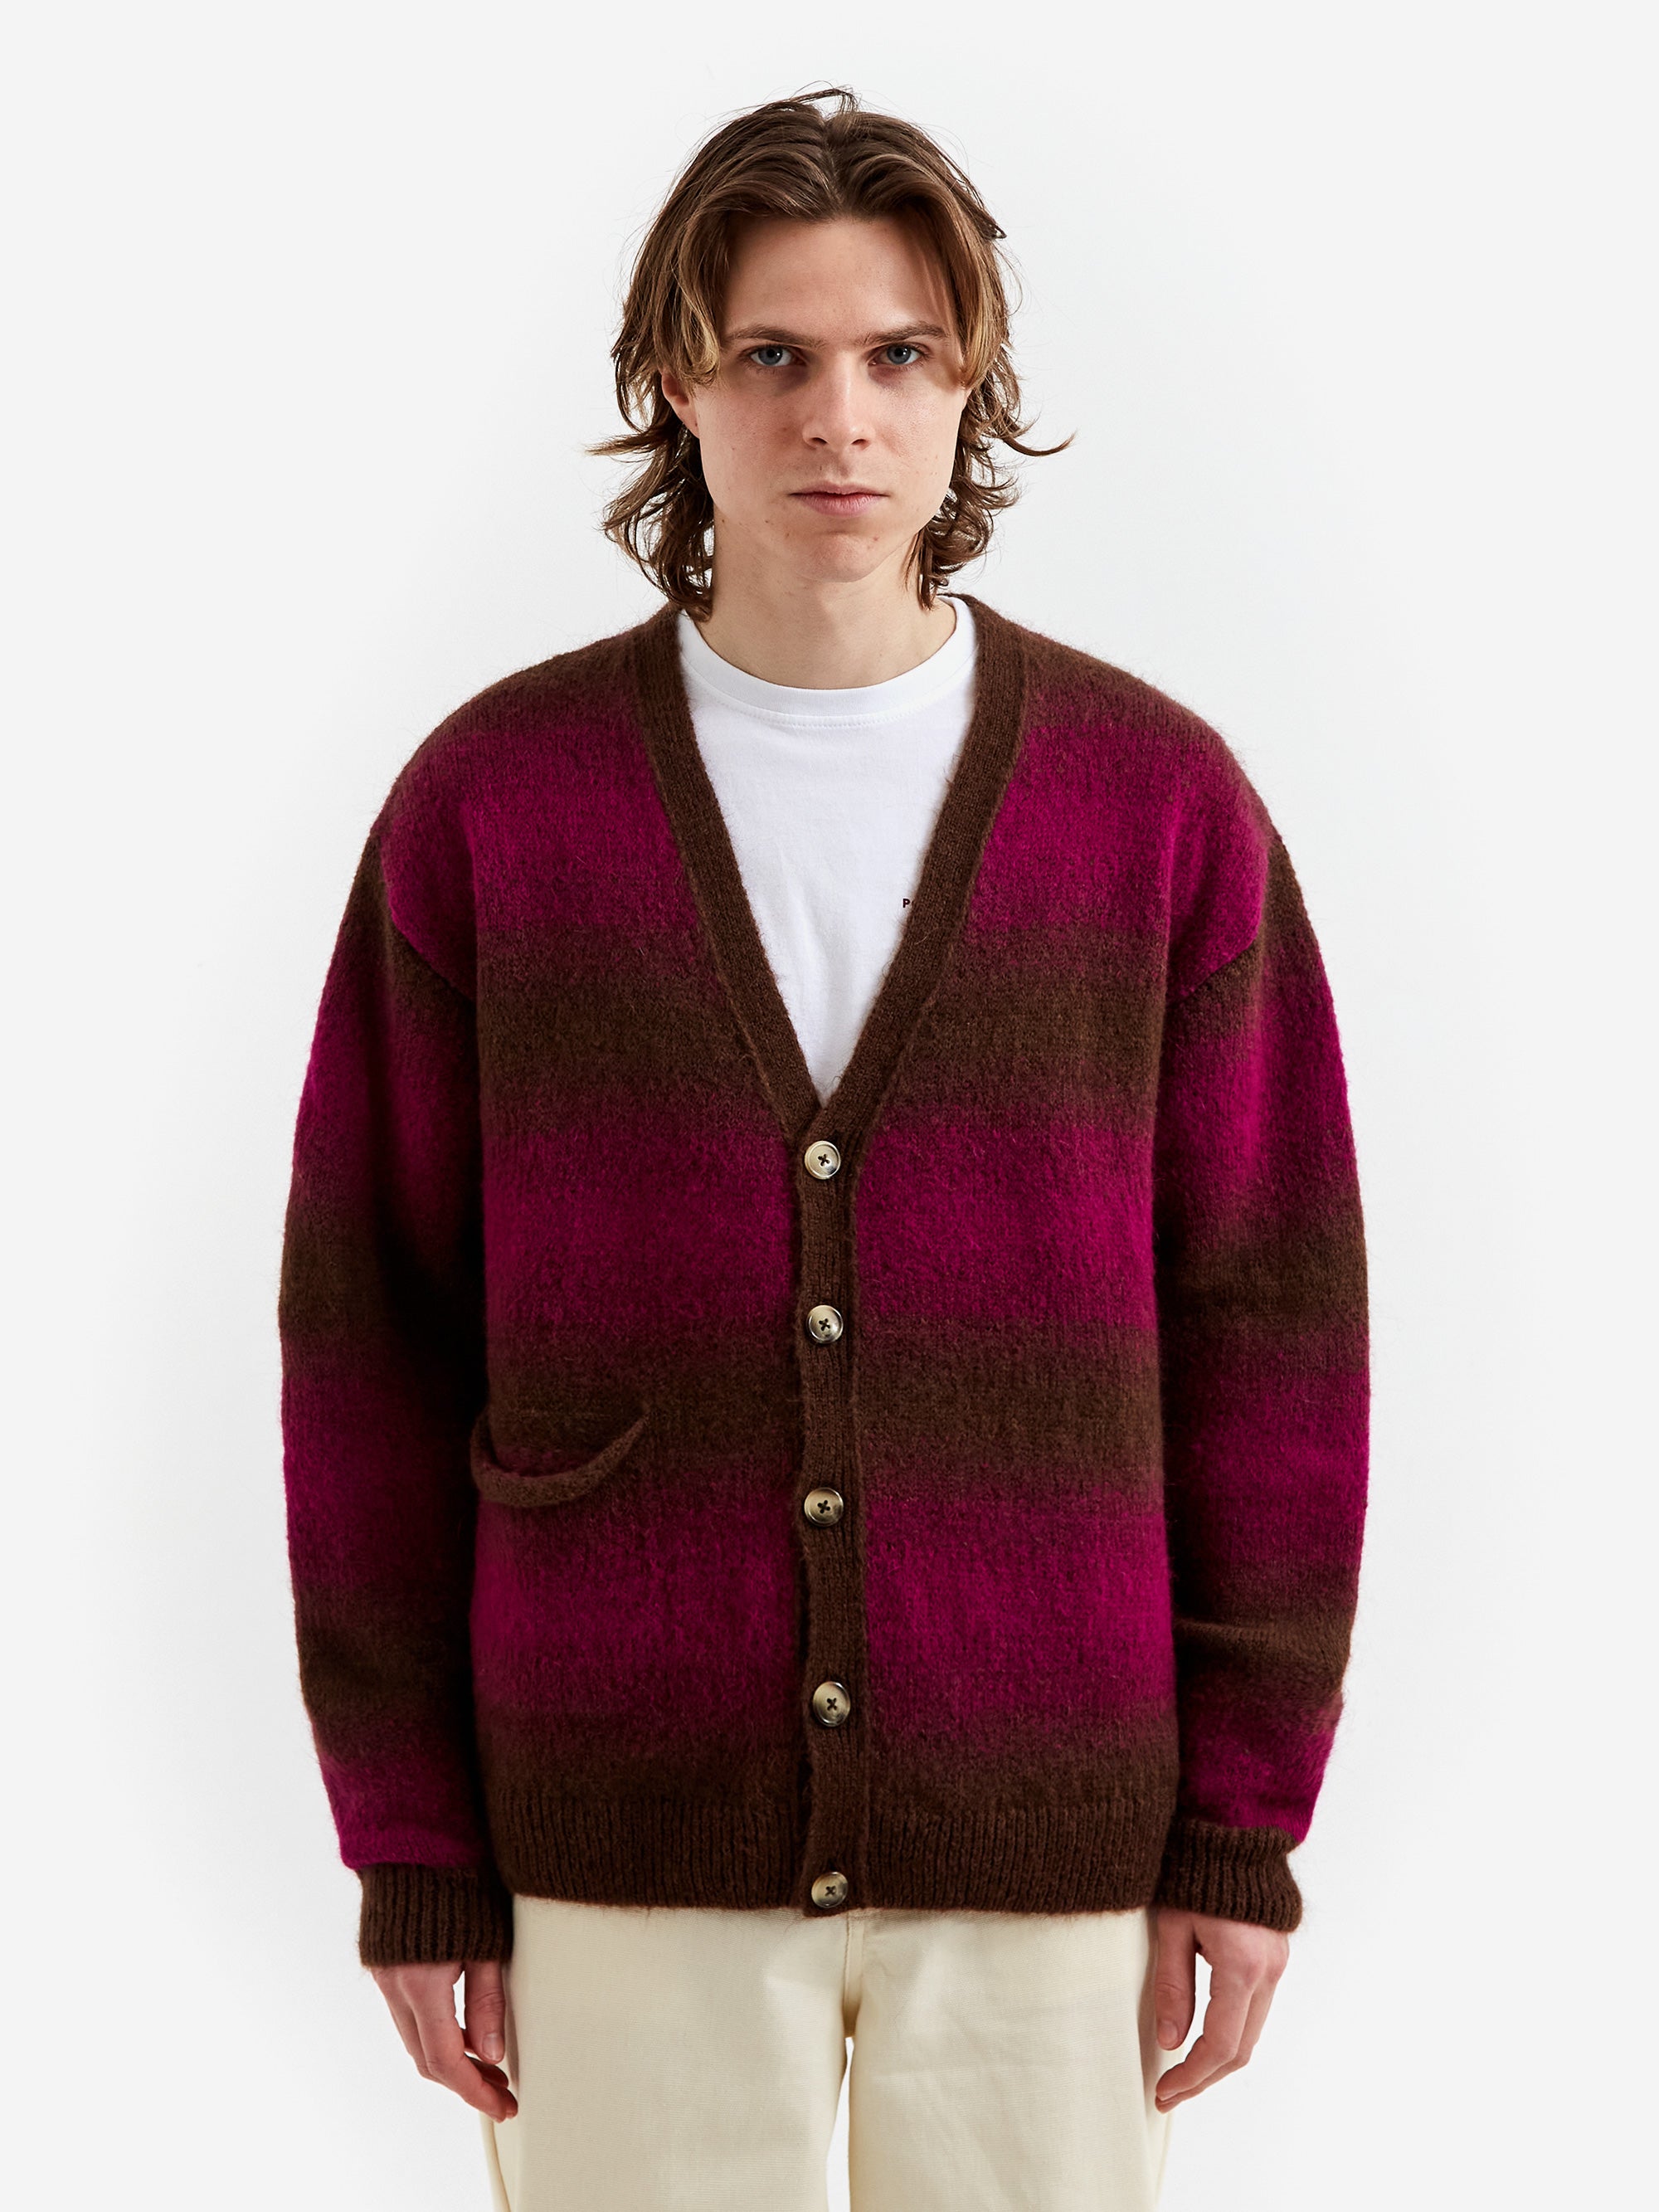 Pop Trading Company Knitted Cardigan - Delicioso/Raspberry